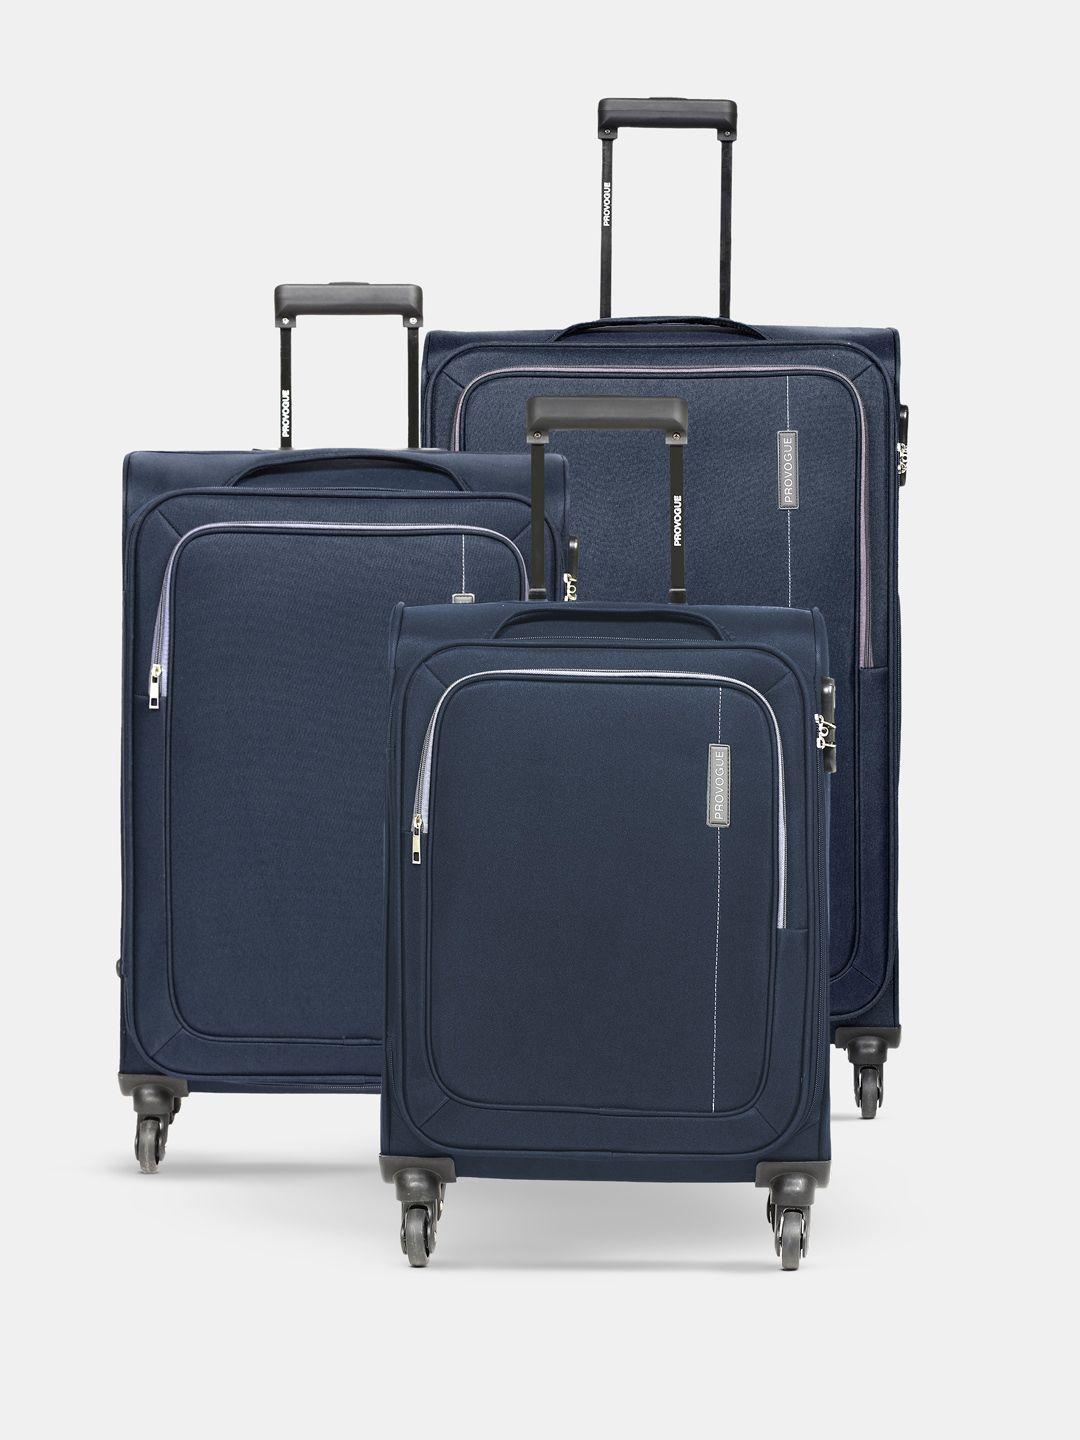 provogue soft body set of 3 lead small, medium & large size trolley suitcases